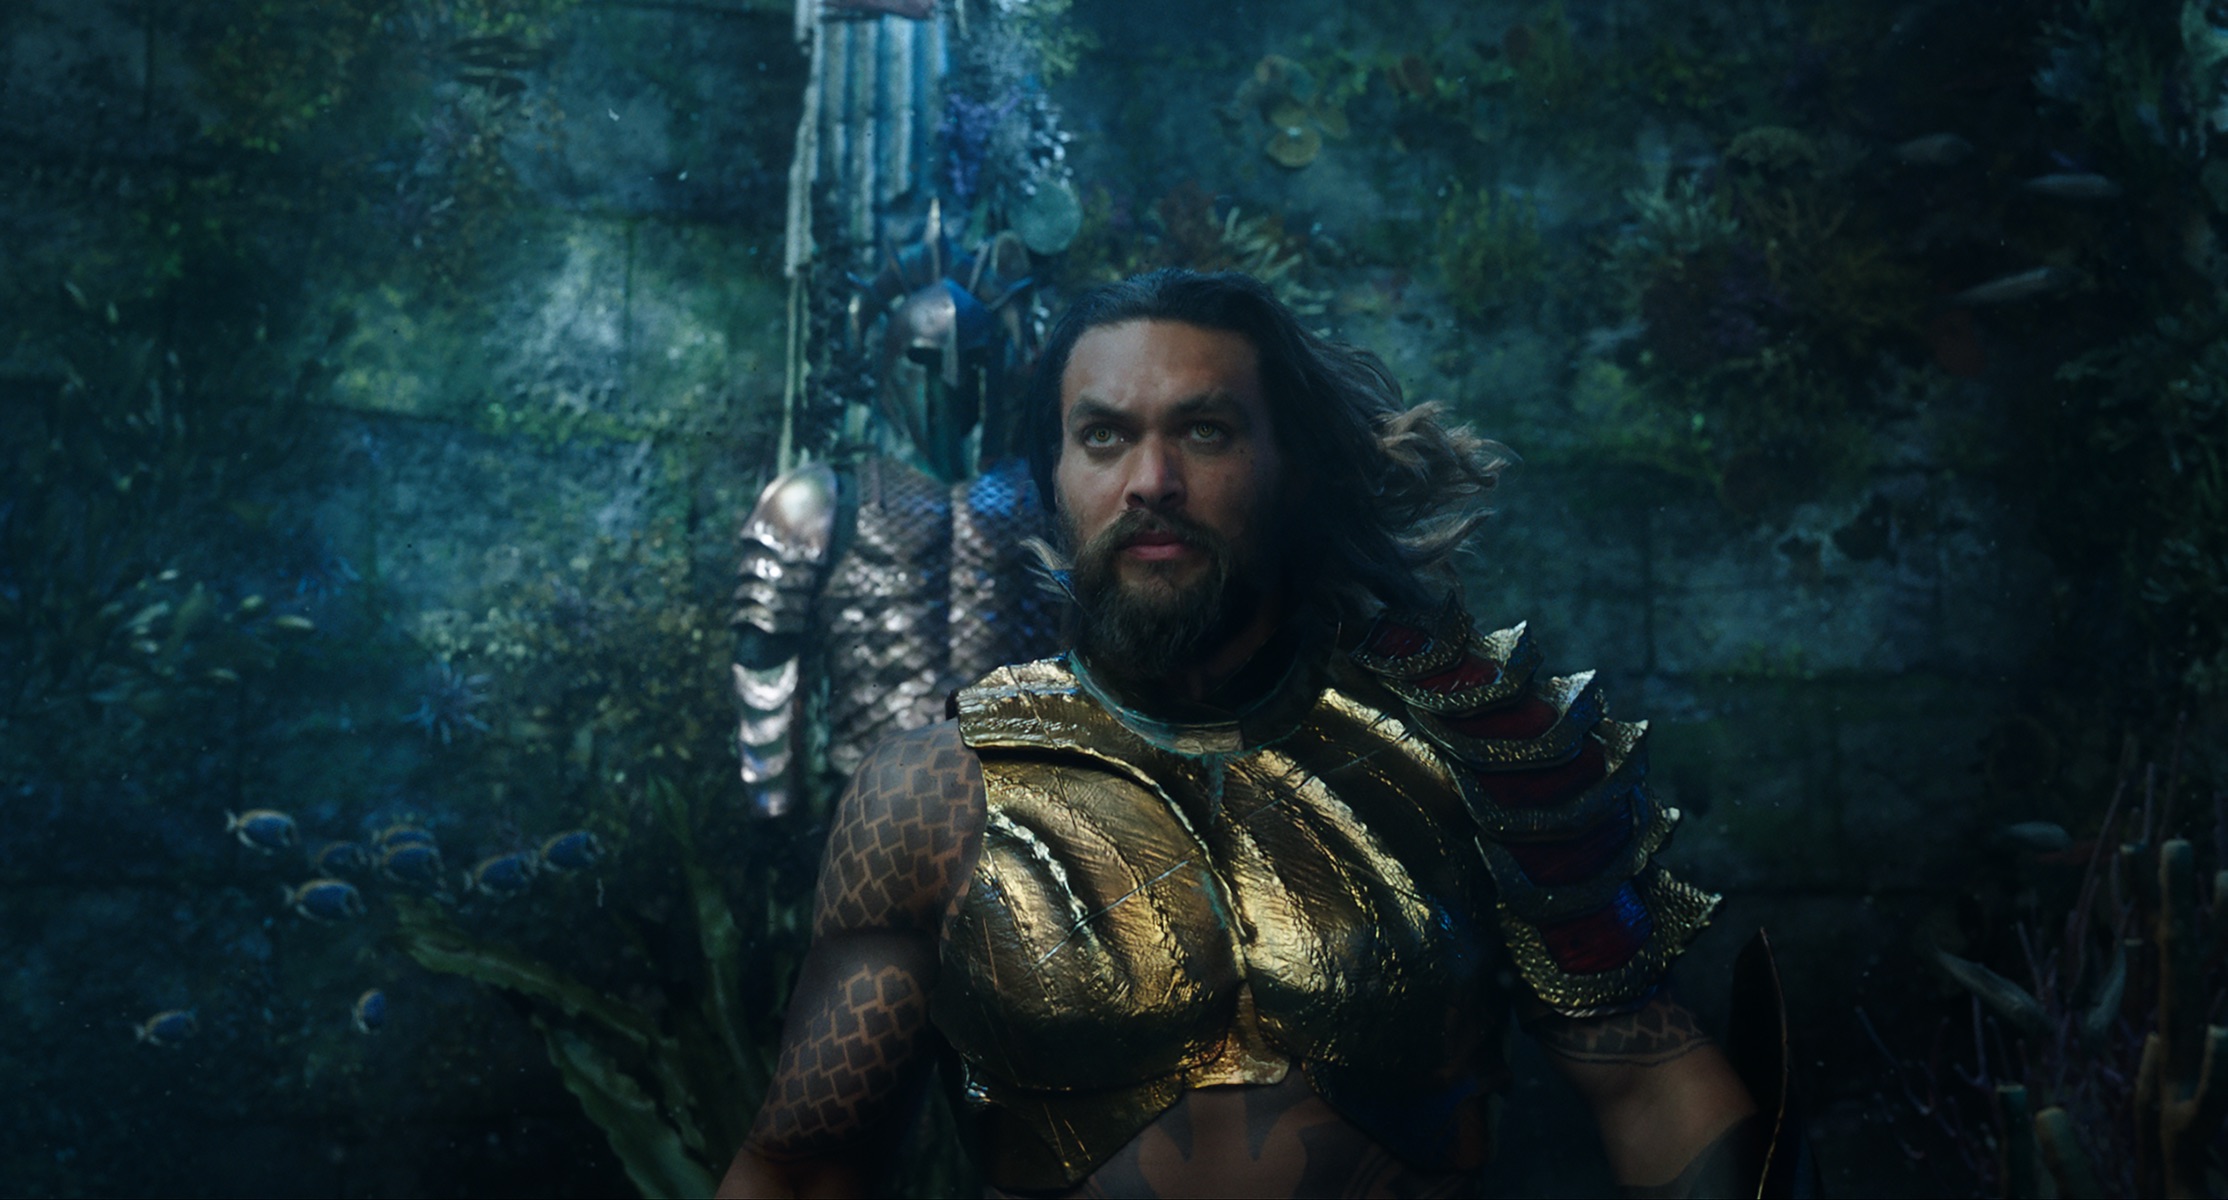 Jason Momoa plays the title role in "Aquaman." (Courtesy of Warner Bros. Pictures)